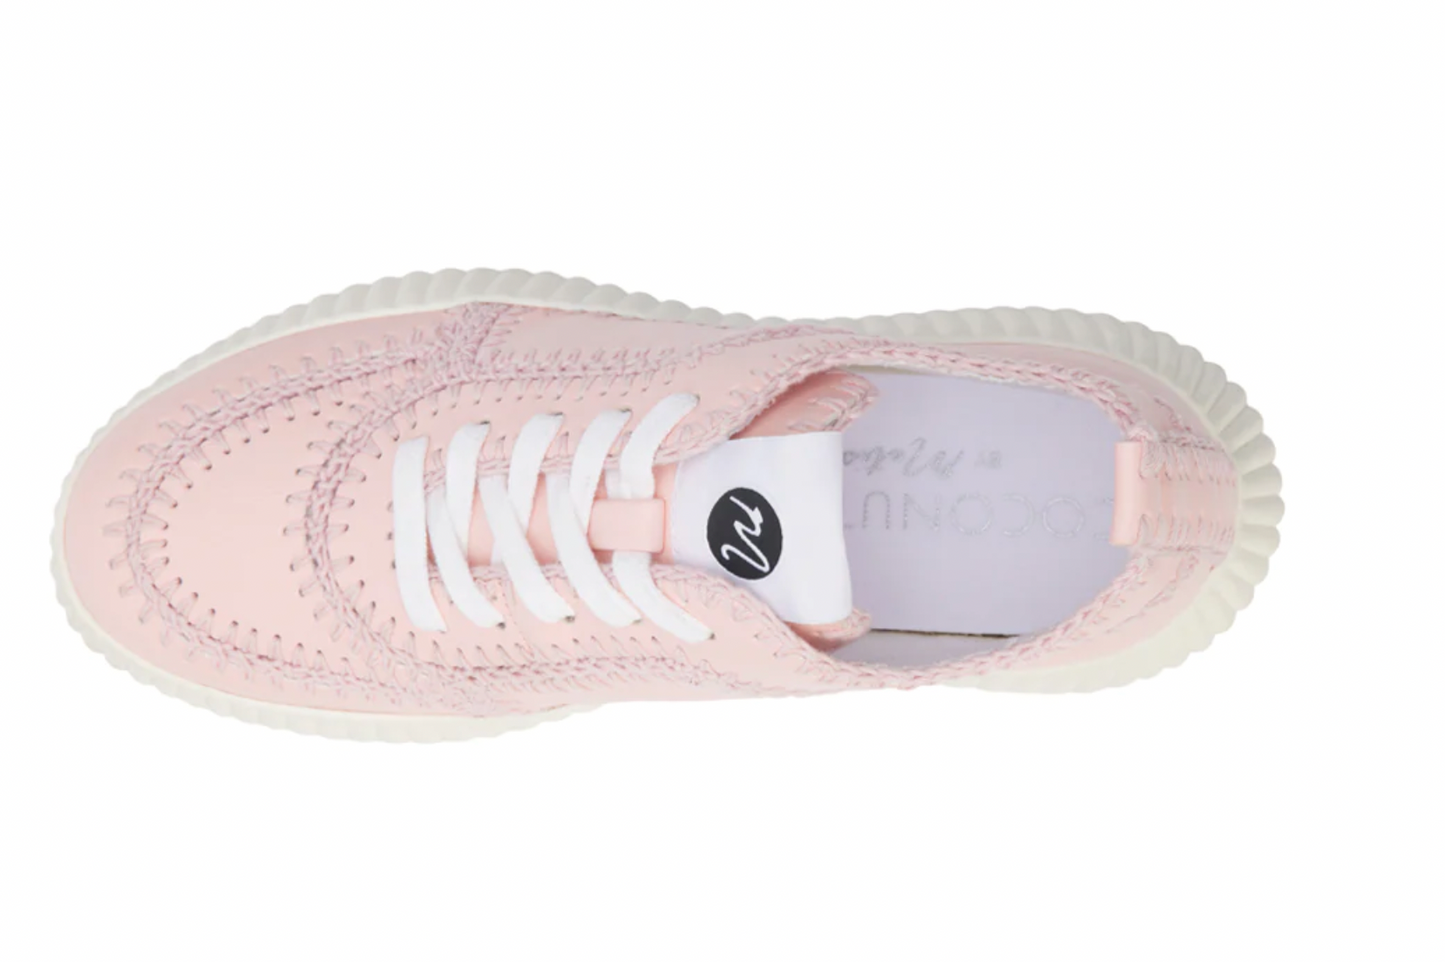 Matisse Nelson Sneakers Pink